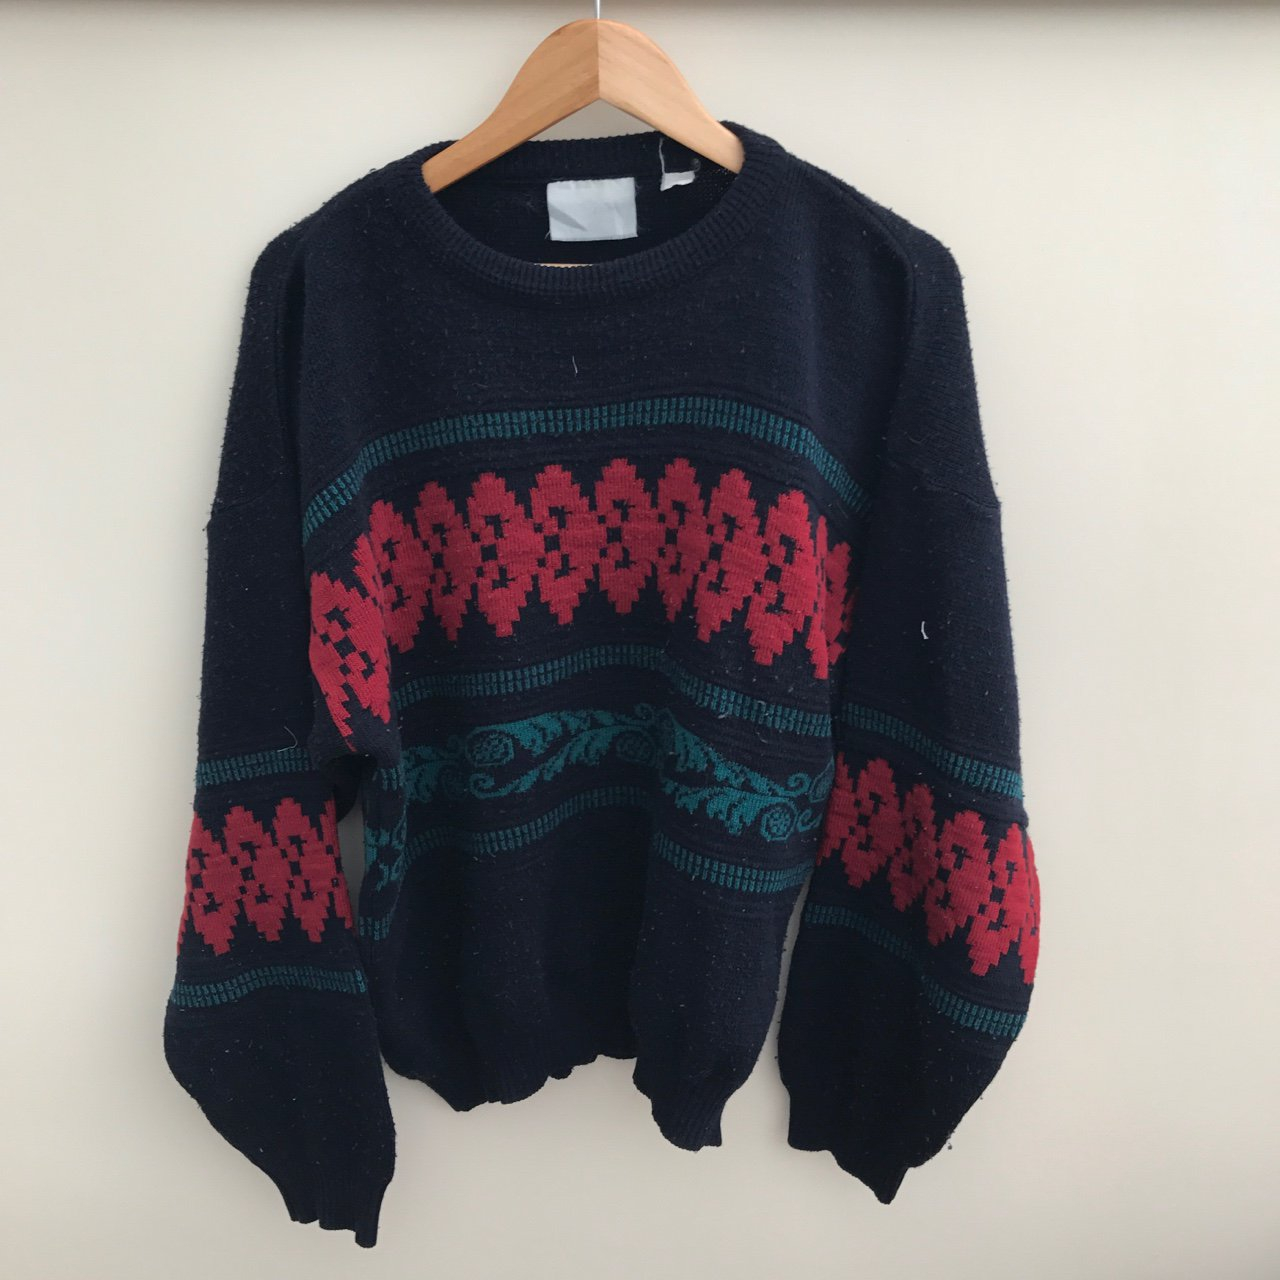 Retro Christmas Jumper Knitting Patterns Listed On Depop Yourinternetcafe